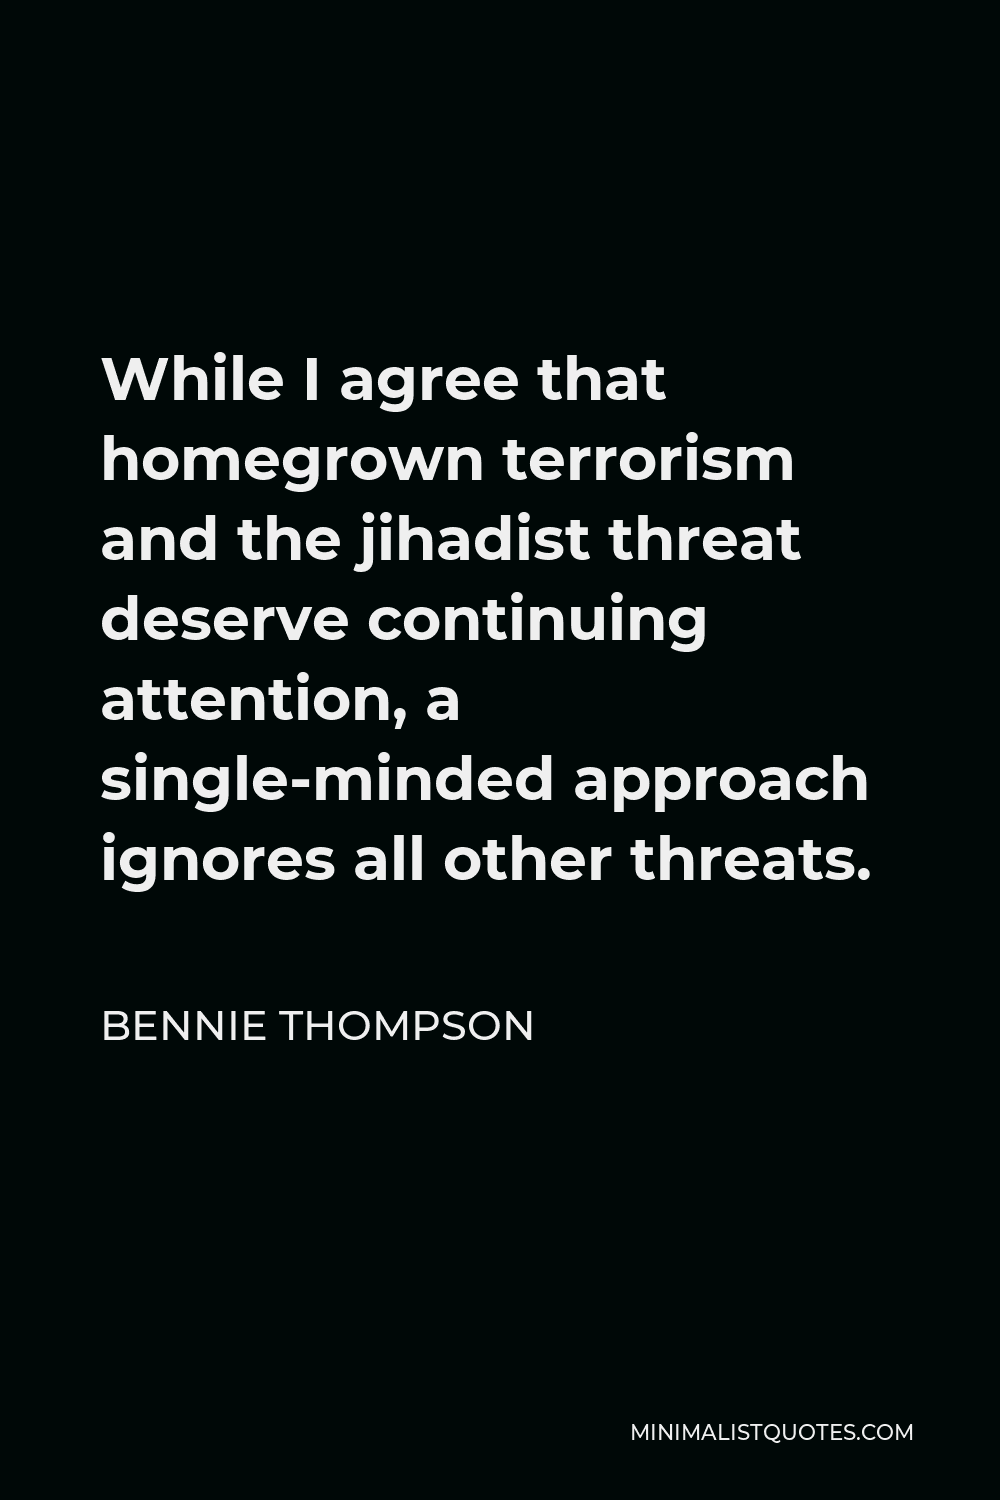 Bennie Thompson Quote - While I agree that homegrown terrorism and the jihadist threat deserve continuing attention, a single-minded approach ignores all other threats.